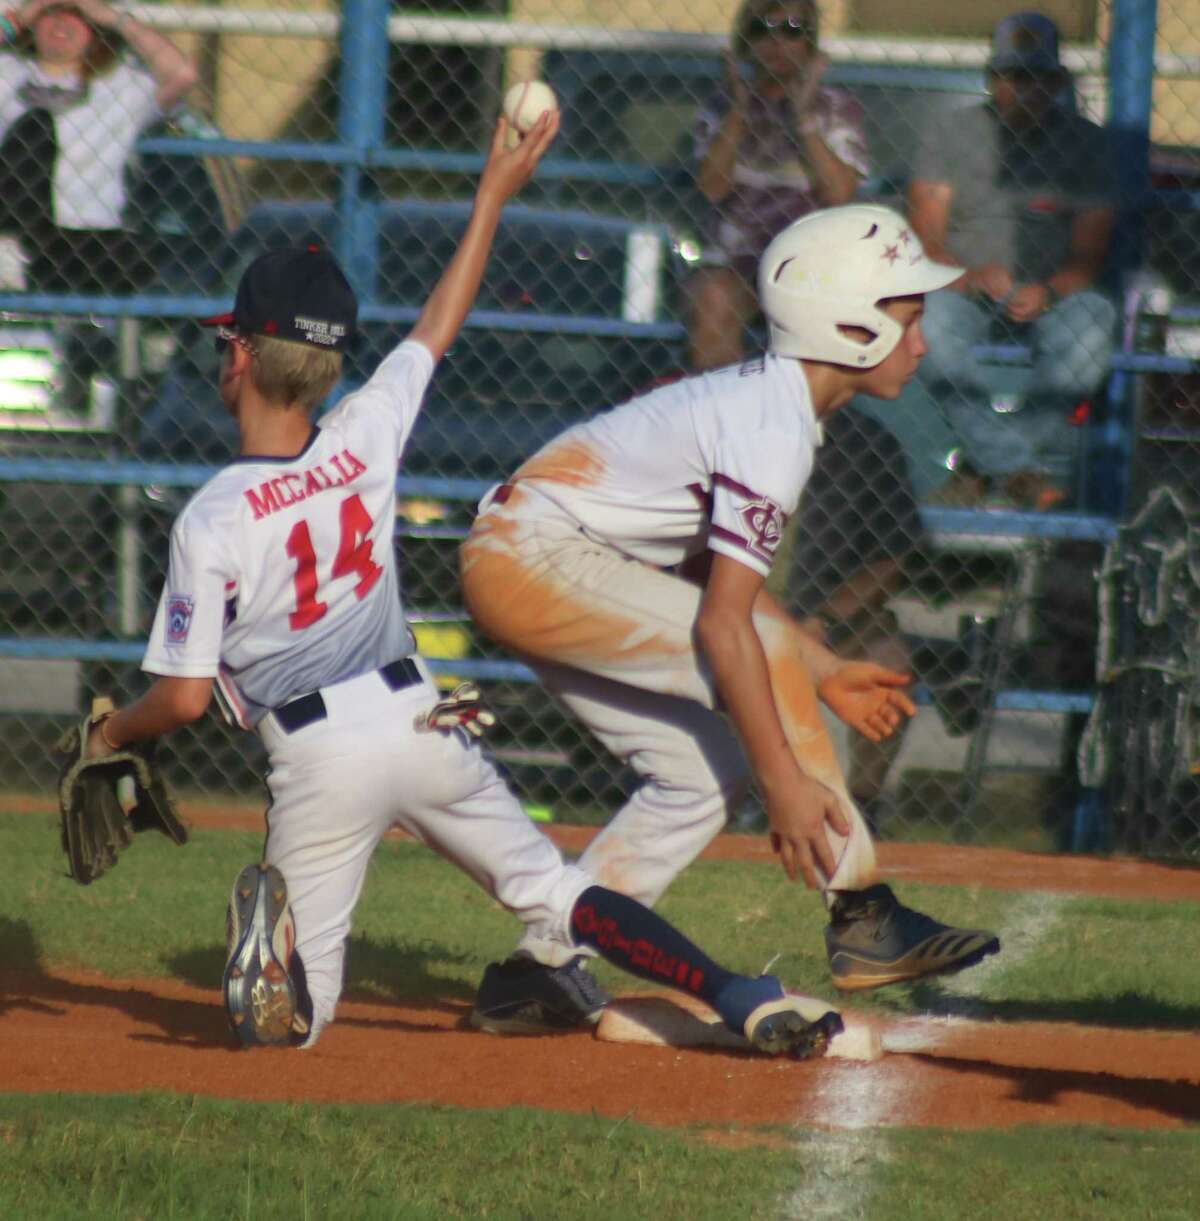 Jacob McGee, the hottest Little League batter in Texas at the moment, stands up after sliding into third with a first-inning triple Thursday night. Bayside third baseman Jack McCalla, who played well offensively and defensively, throws the ball back to the pitcher.